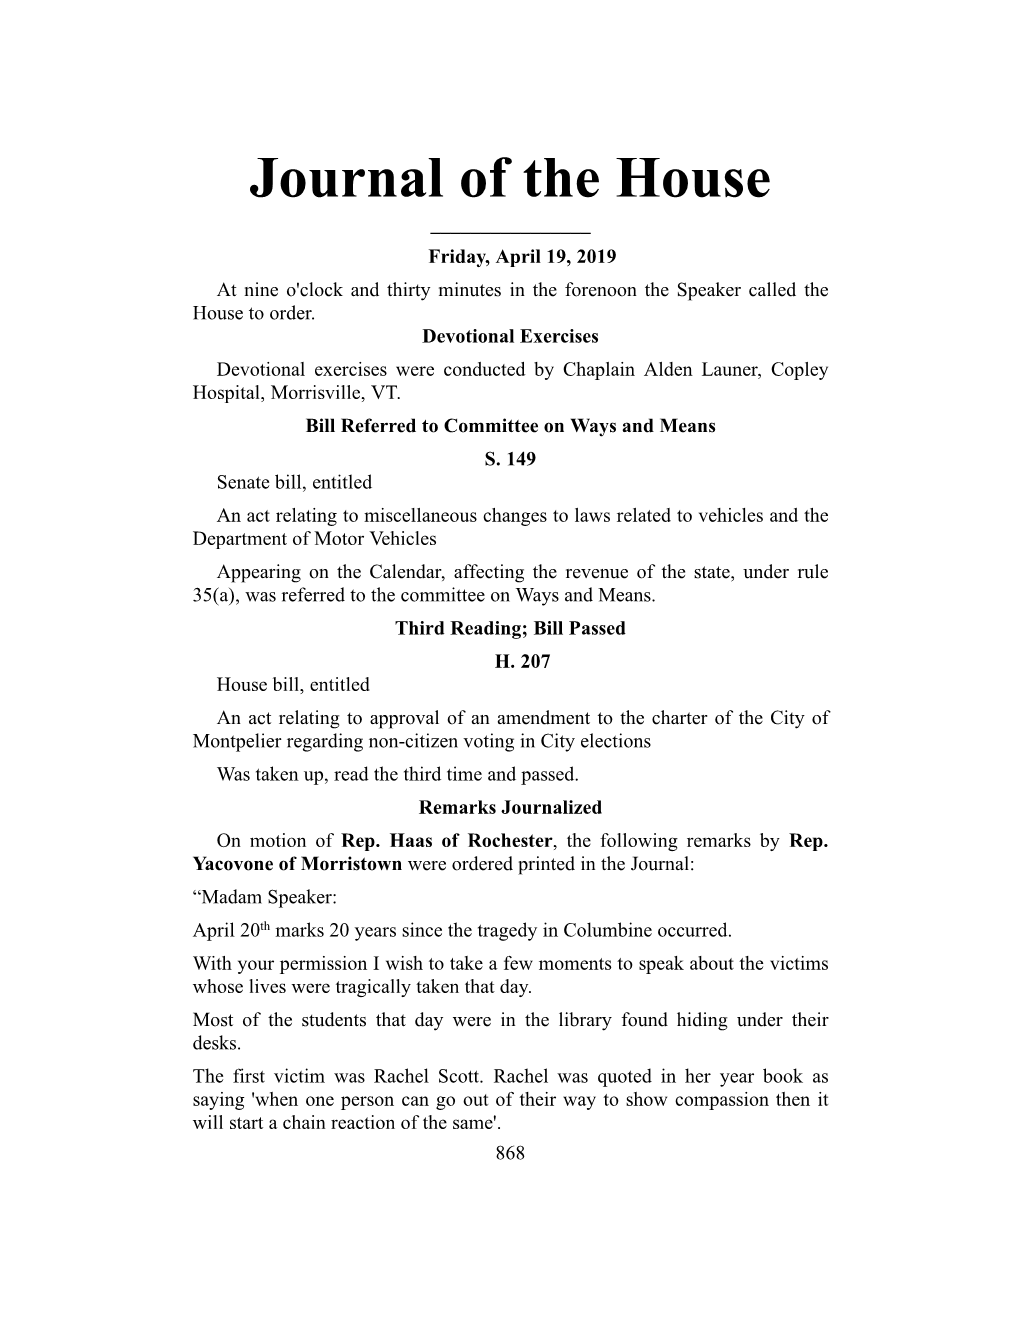 Journal of the House ______Friday, April 19, 2019 at Nine O'clock and Thirty Minutes in the Forenoon the Speaker Called the House to Order